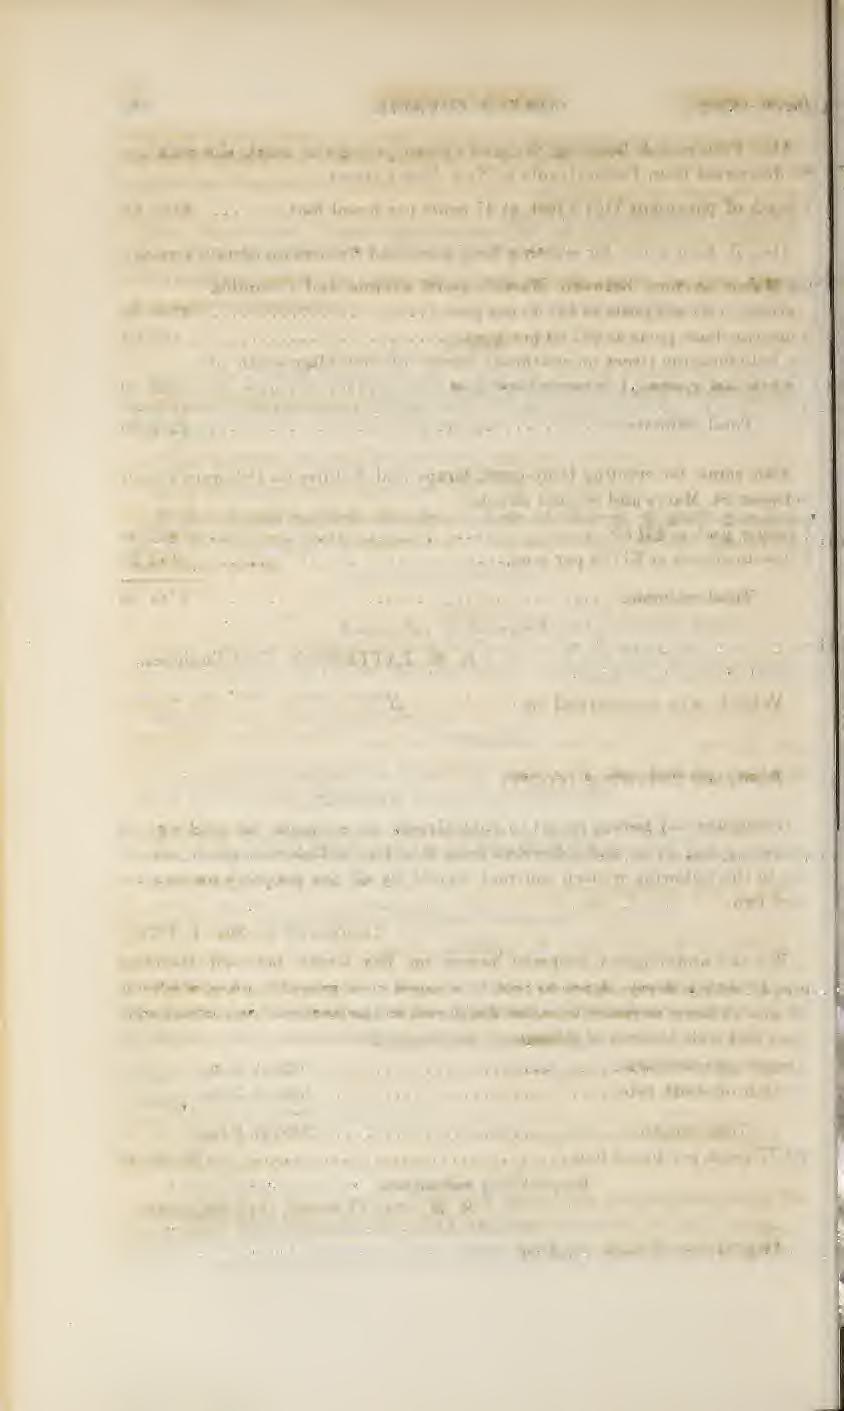 ; 772 COMMON COUNCIL. [Regular Session The City Clerk also submitted the following report Office of City Clerk, > Indianapolis, December 9, 1872.